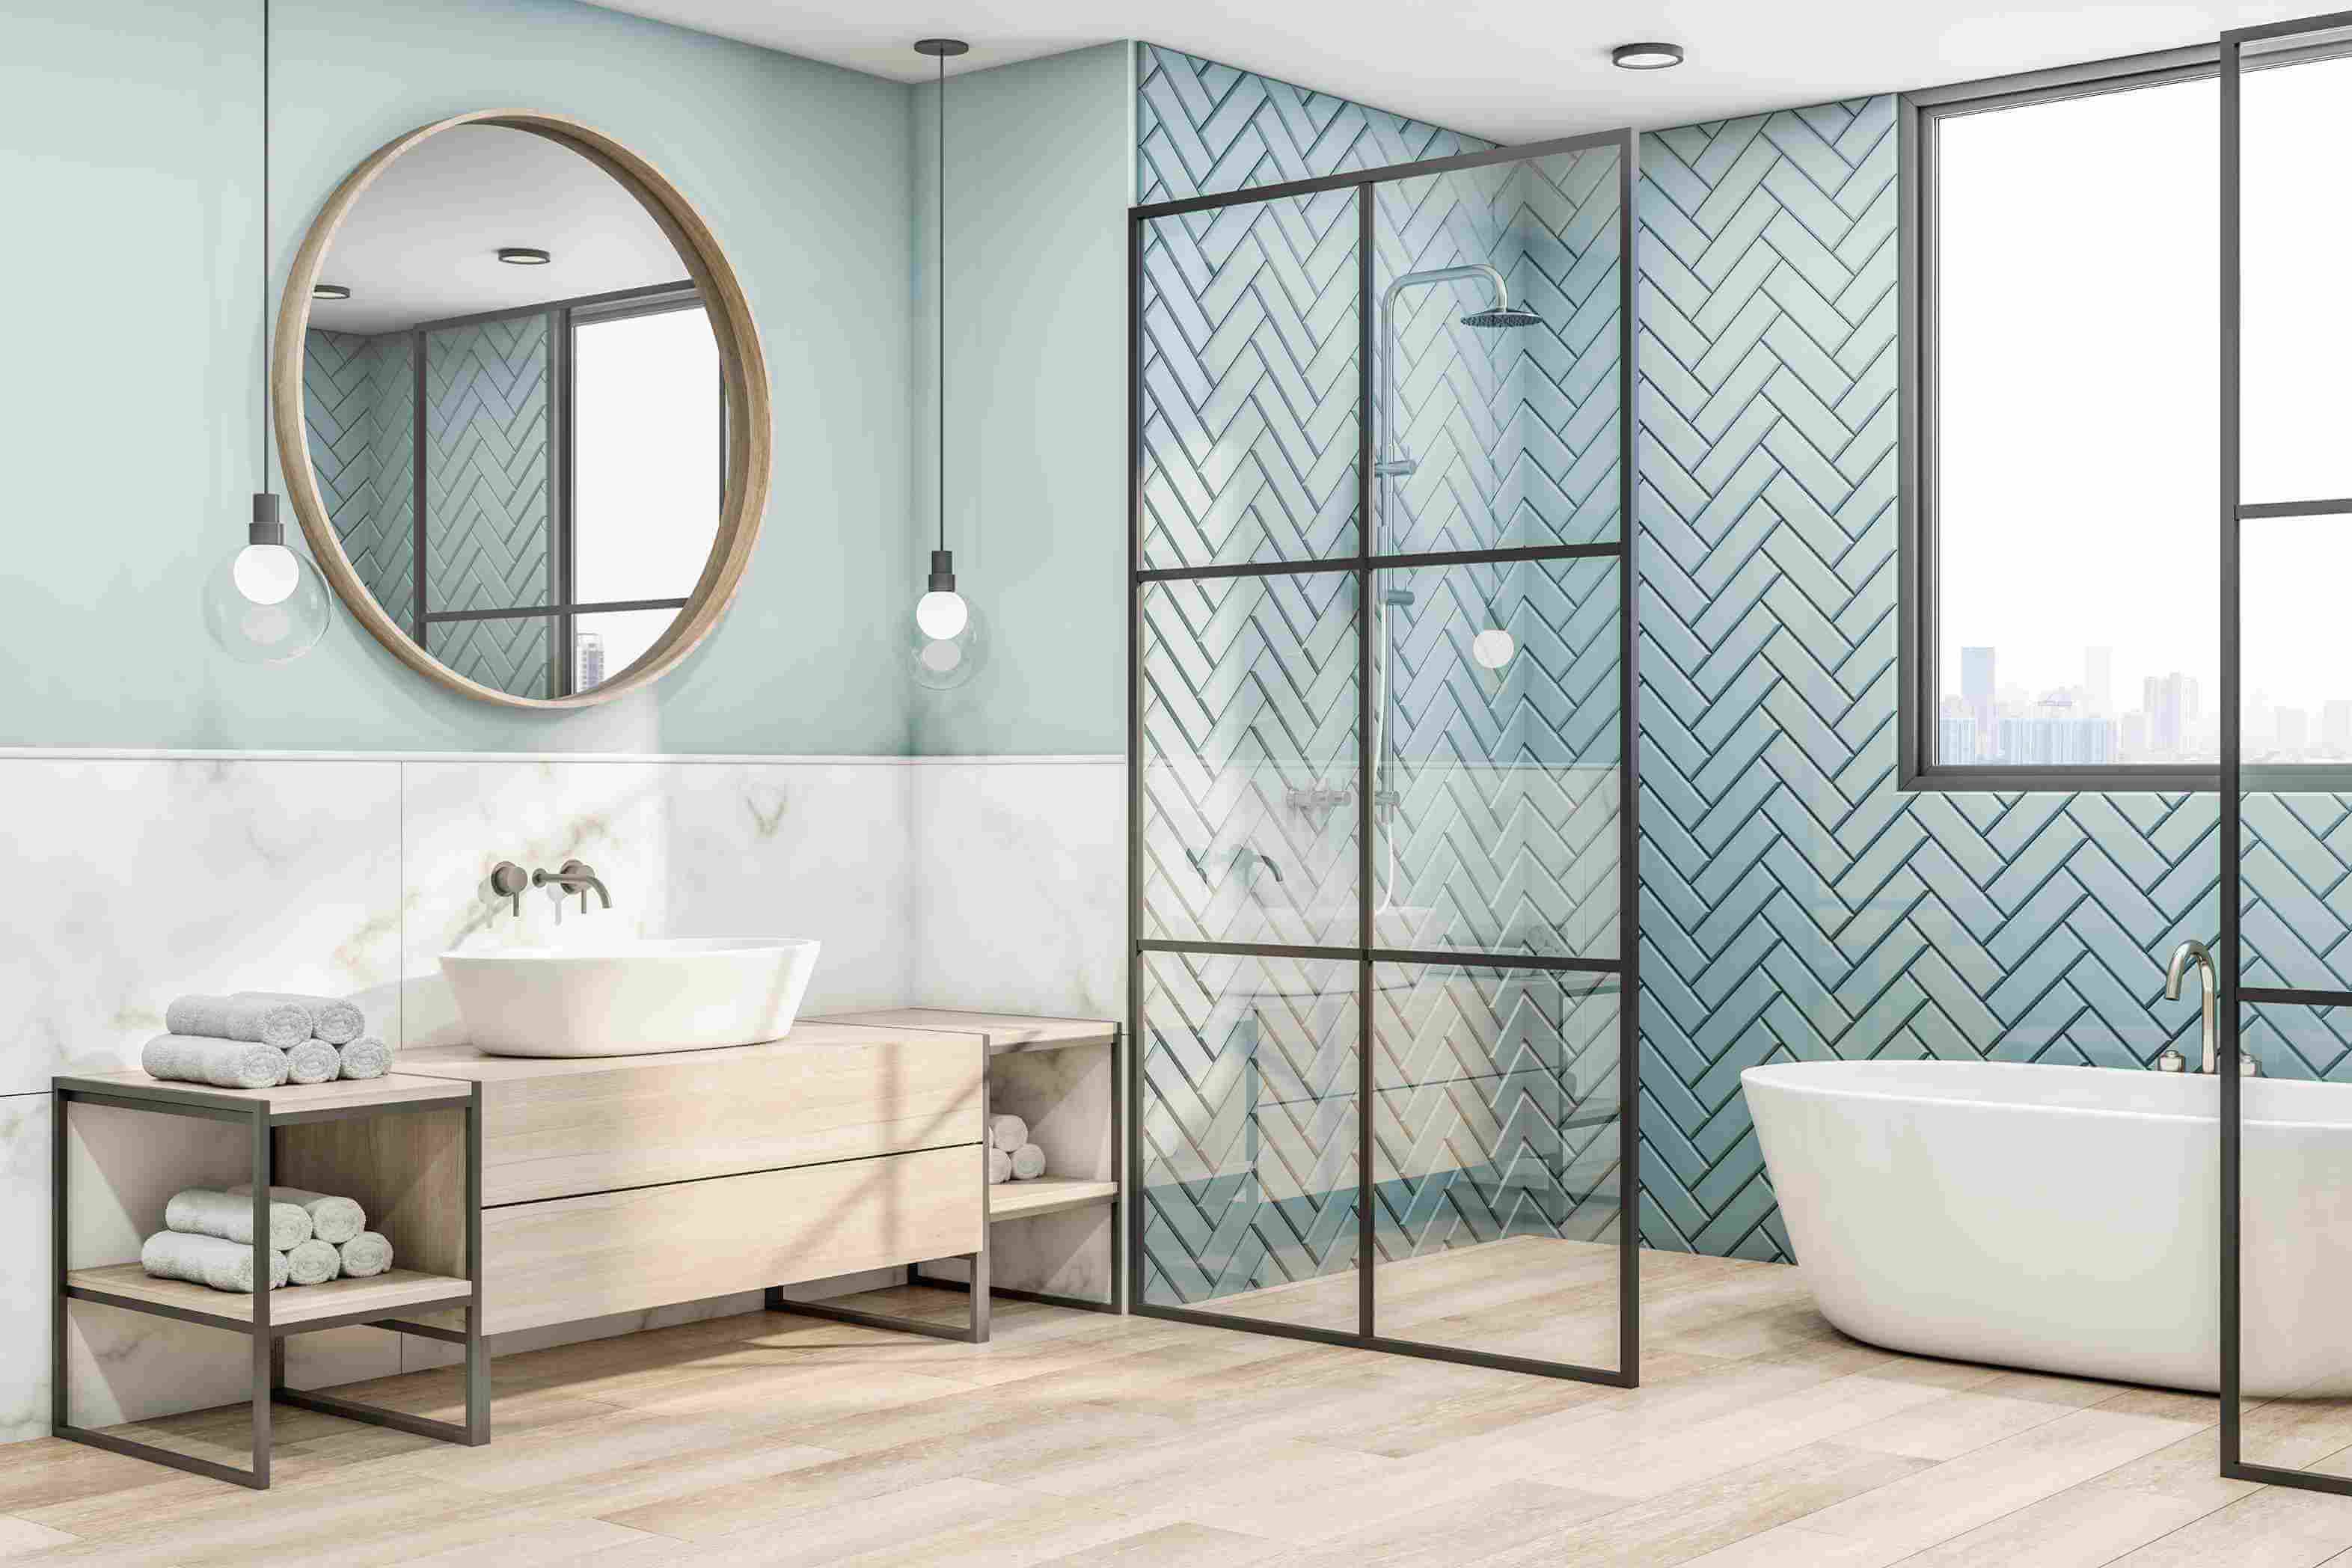 Fun Styles to Try in Your Bathroom